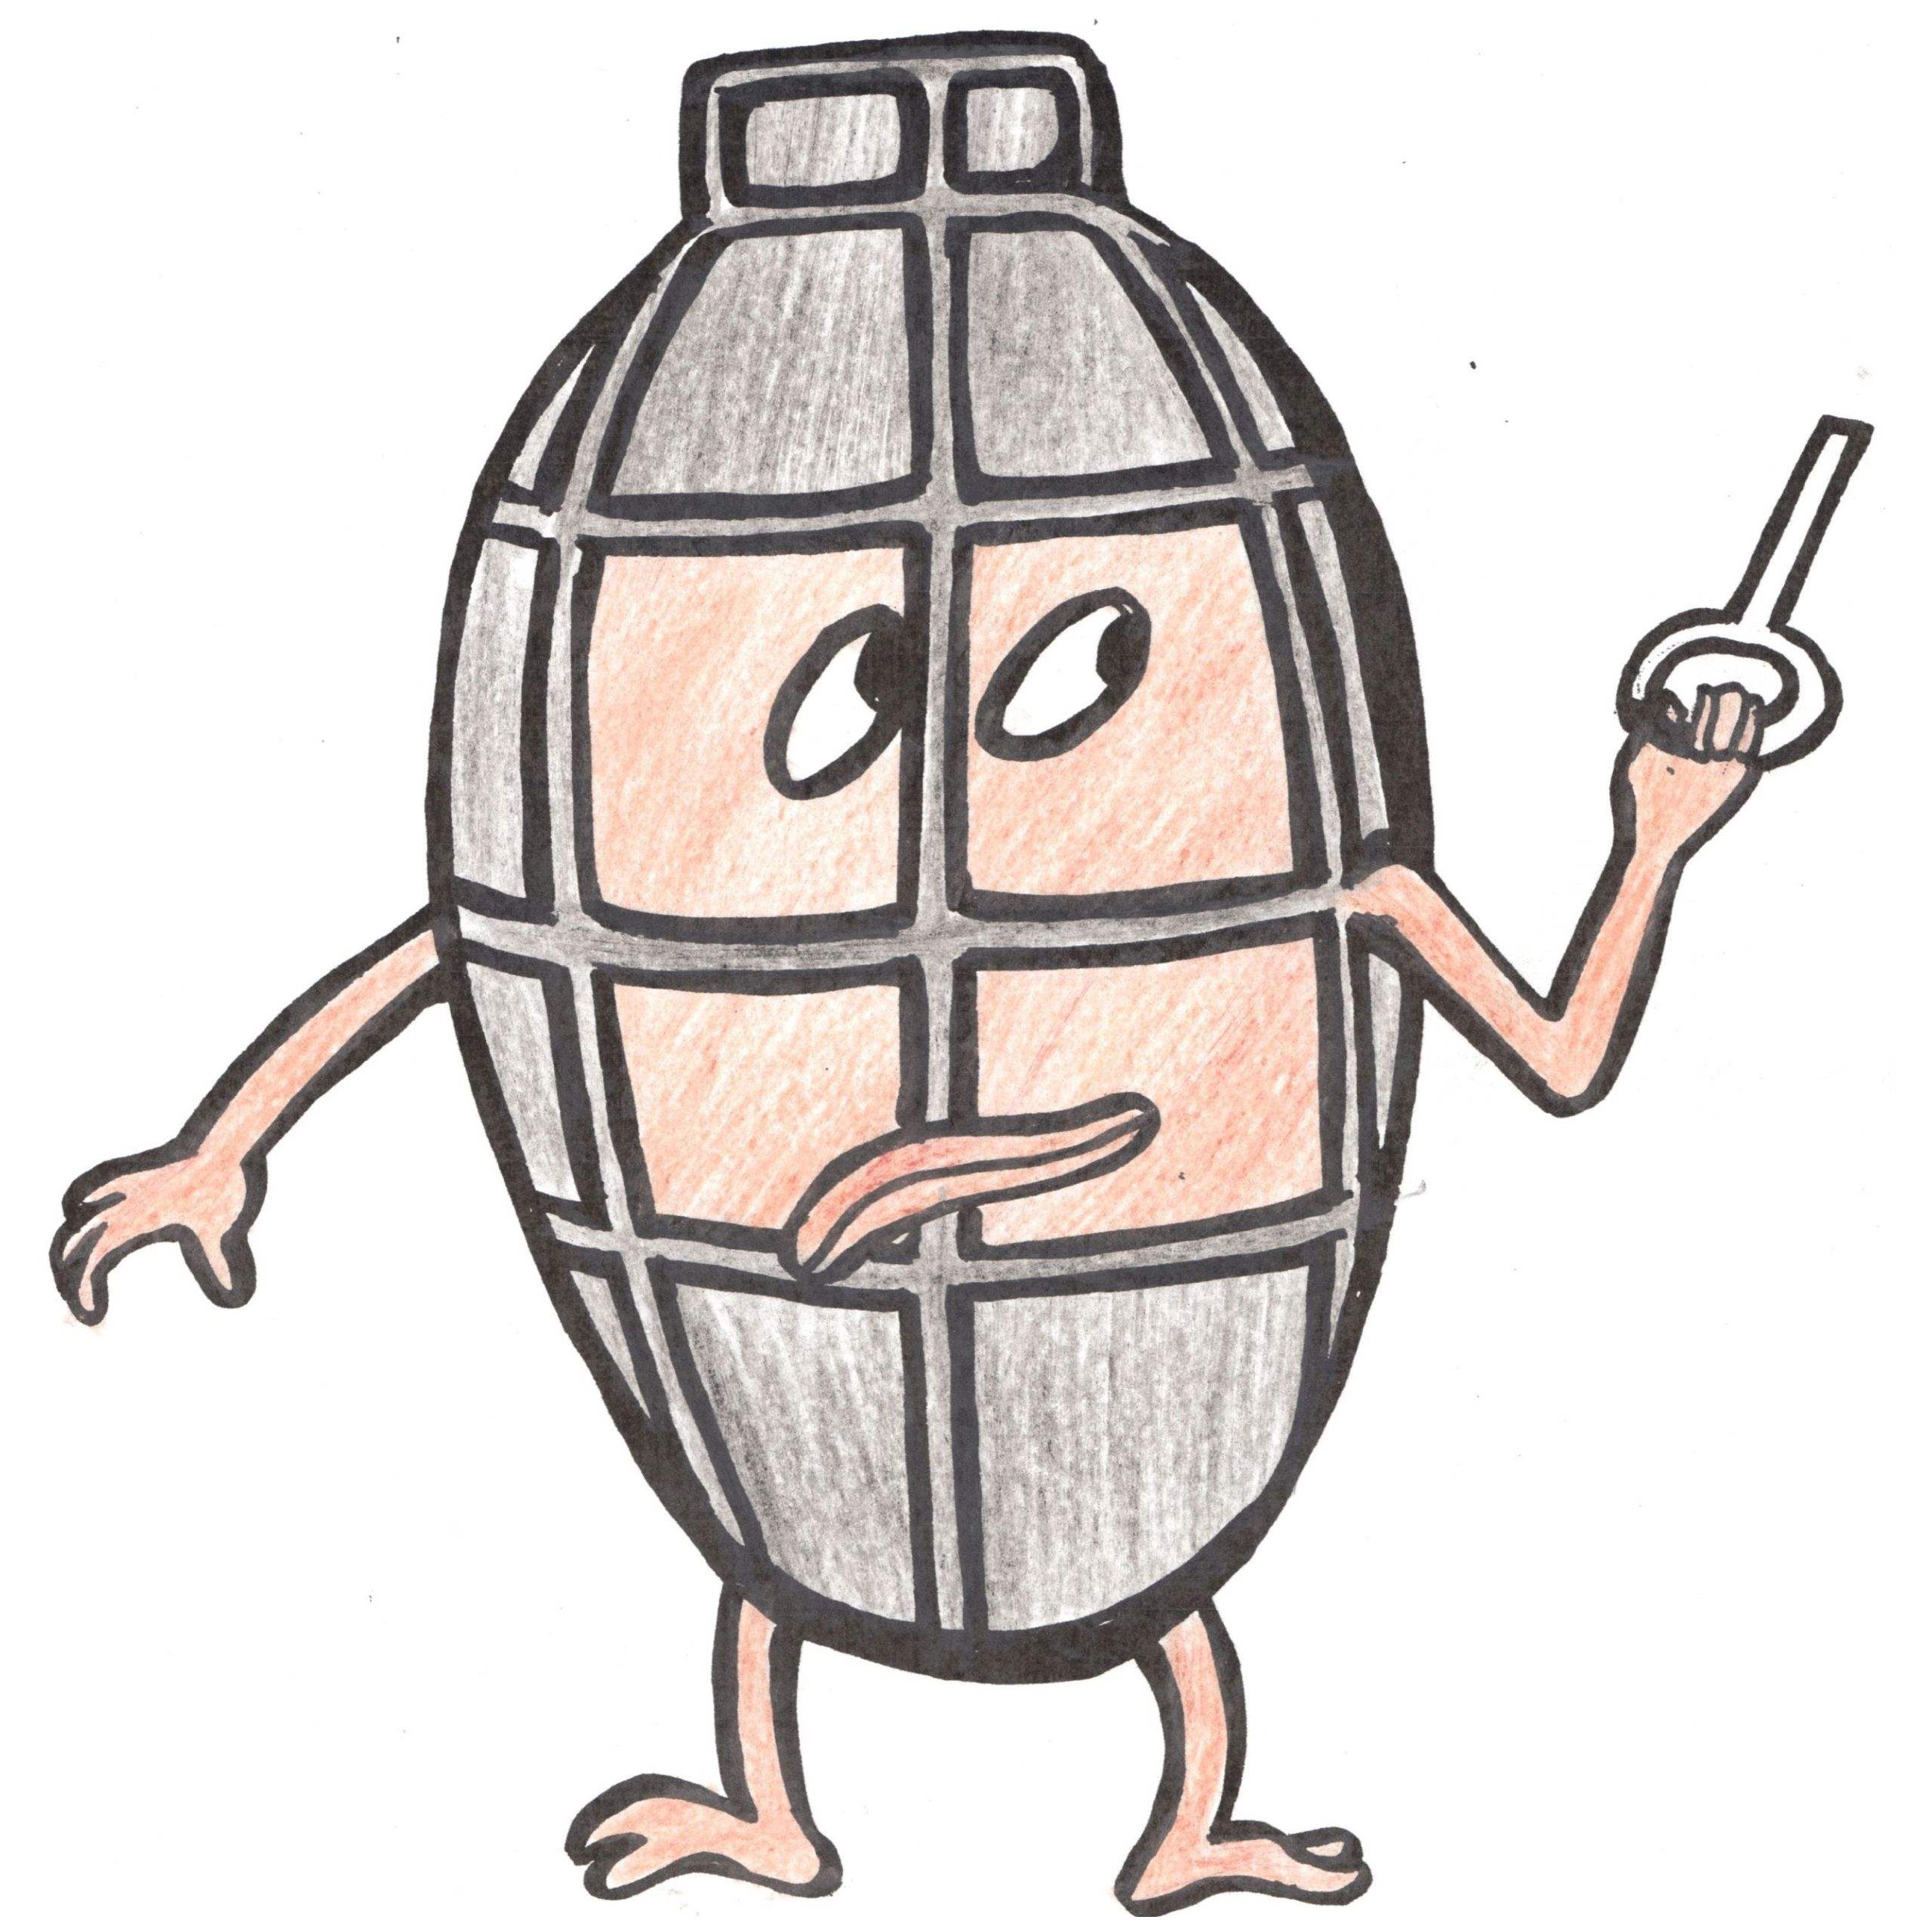 Cartoon Grenade Coloring Pages on UltraColoring.com